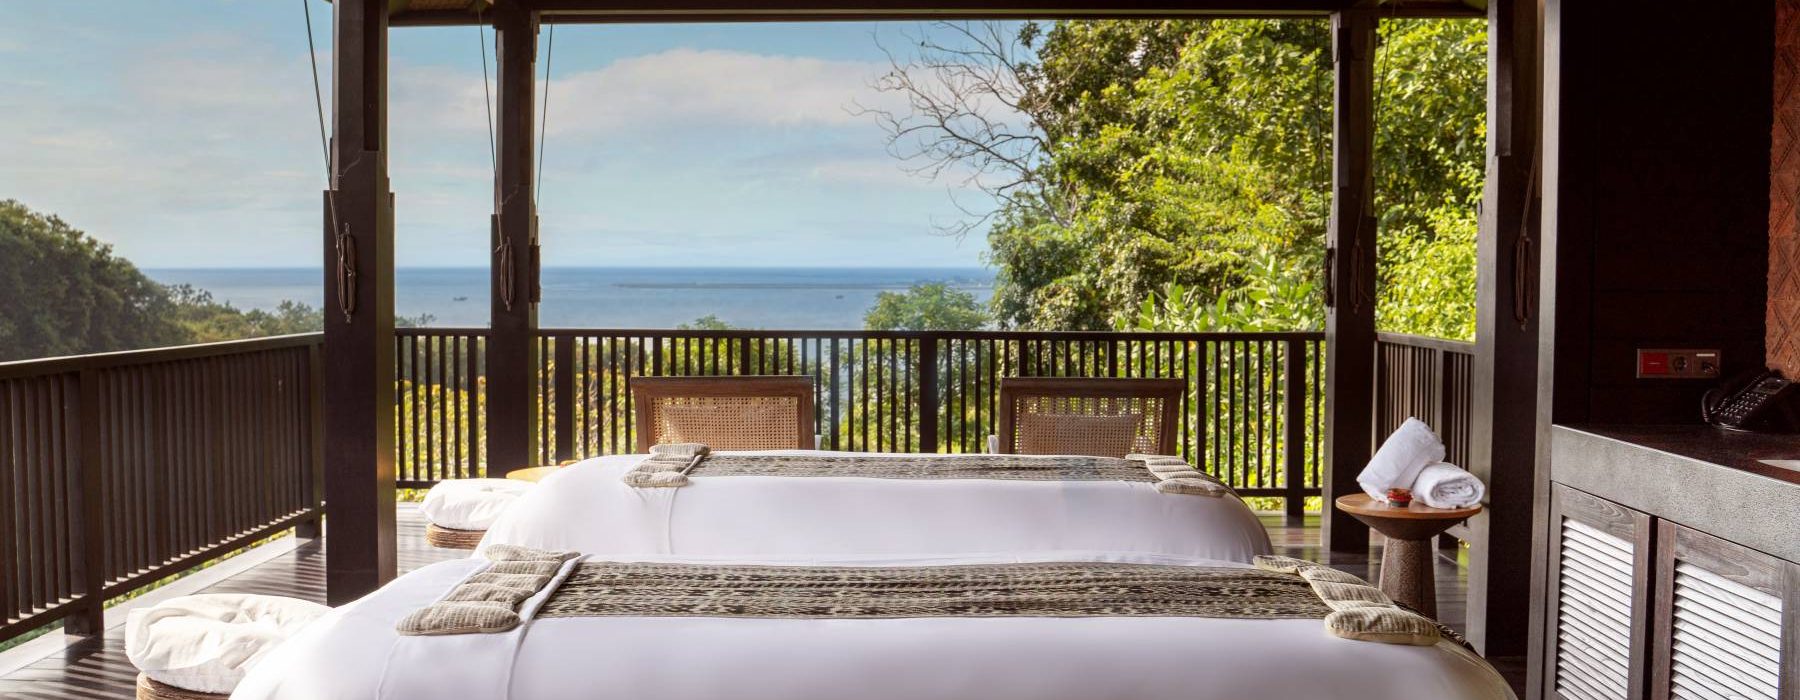 Raffles Bali - Transcend to an Oasis of Emotional Wellbeing at The Sanctuary